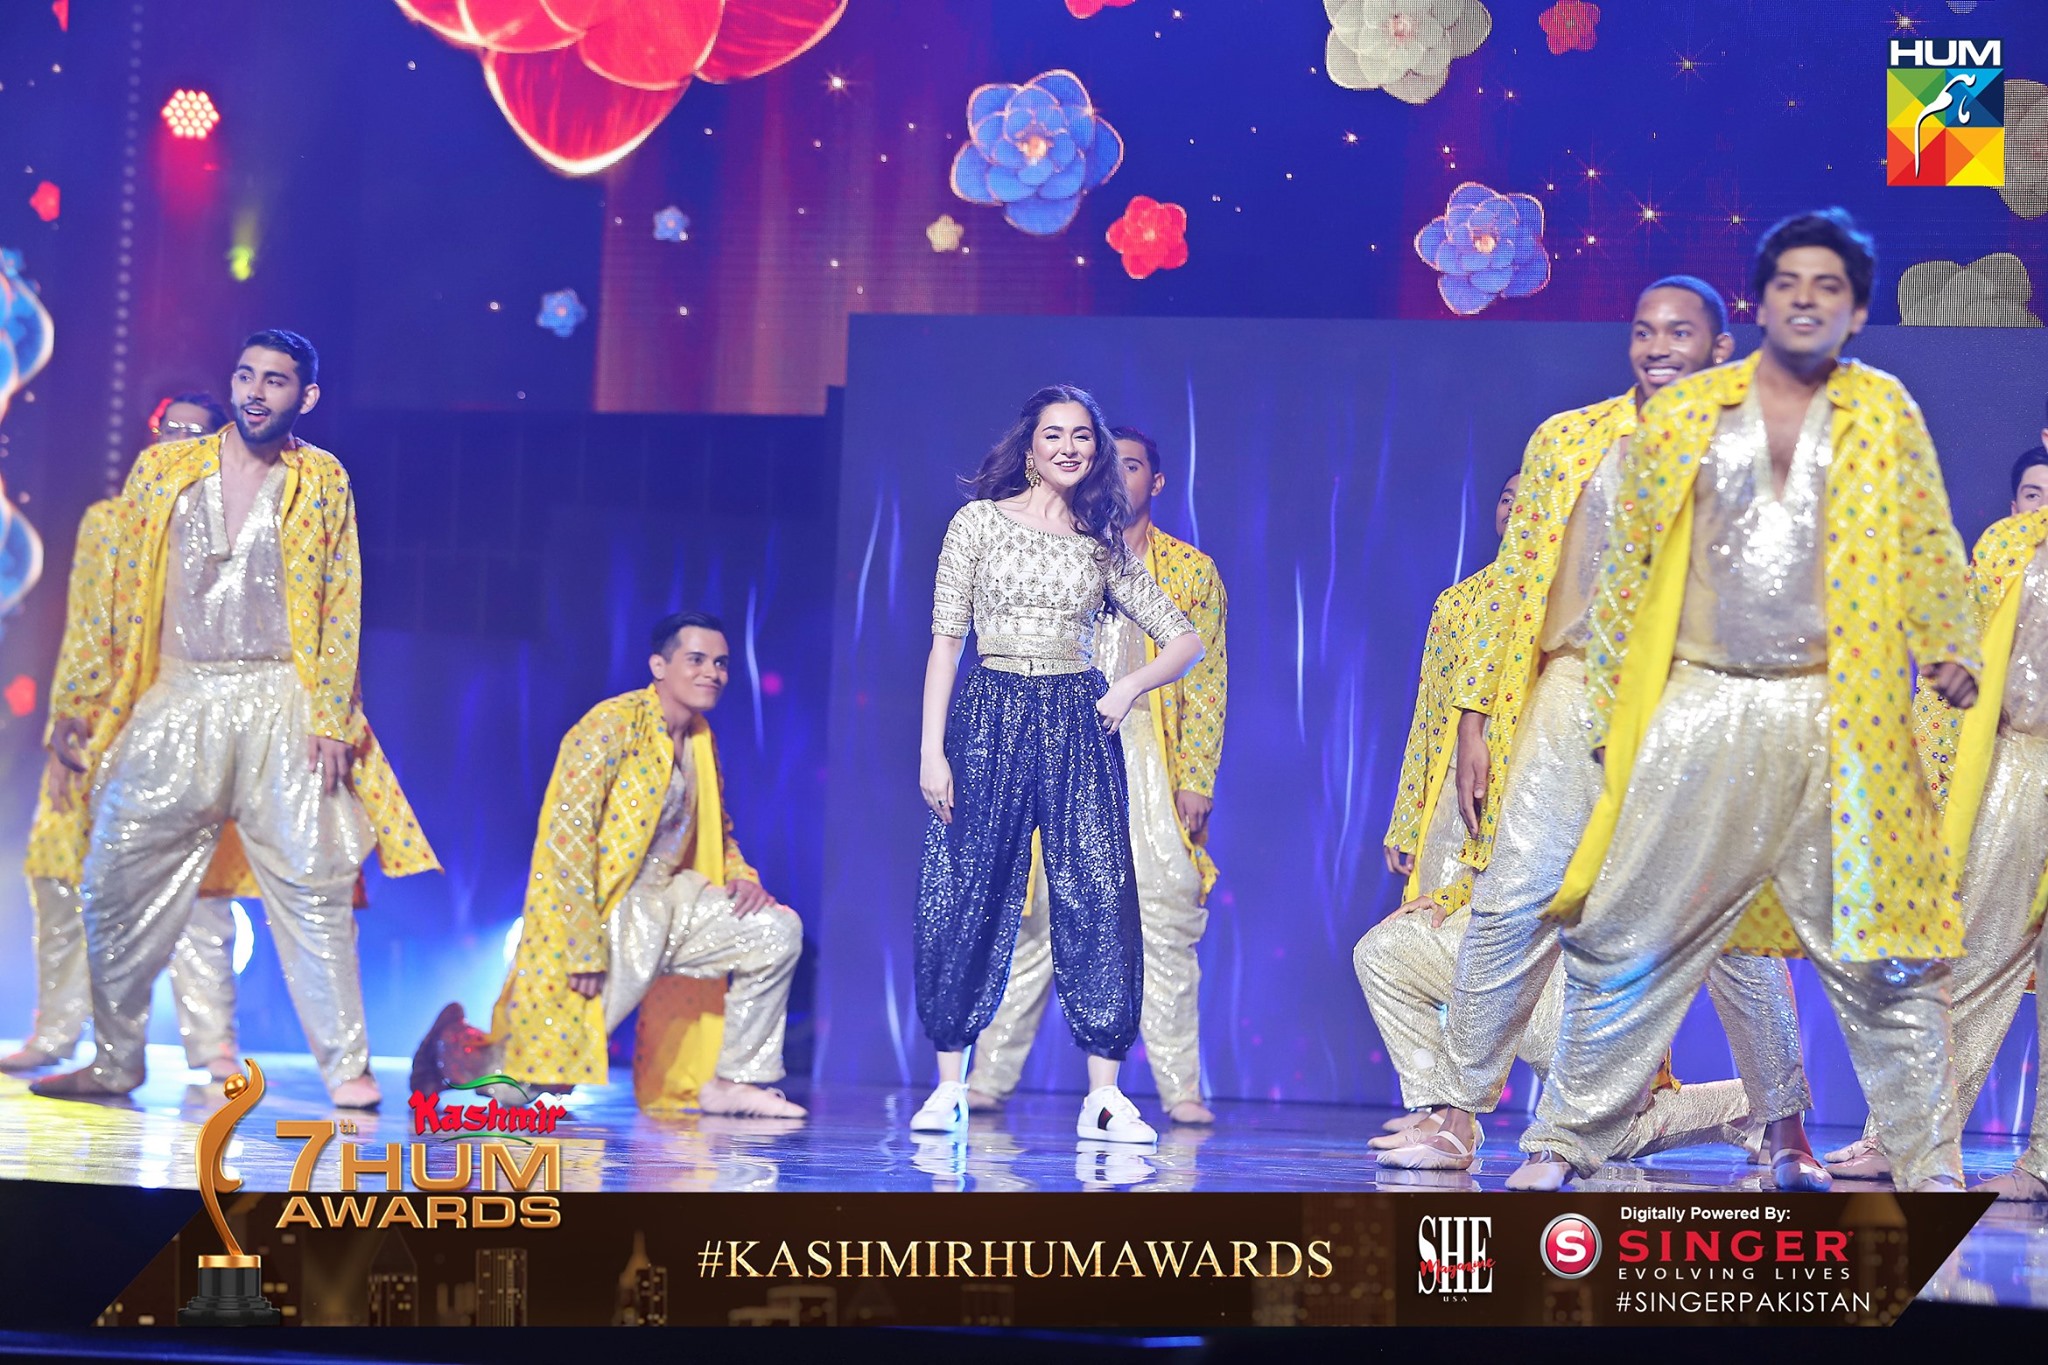 Beautiful Pictures of Pakistan Celebrities from Hum Awards 2019